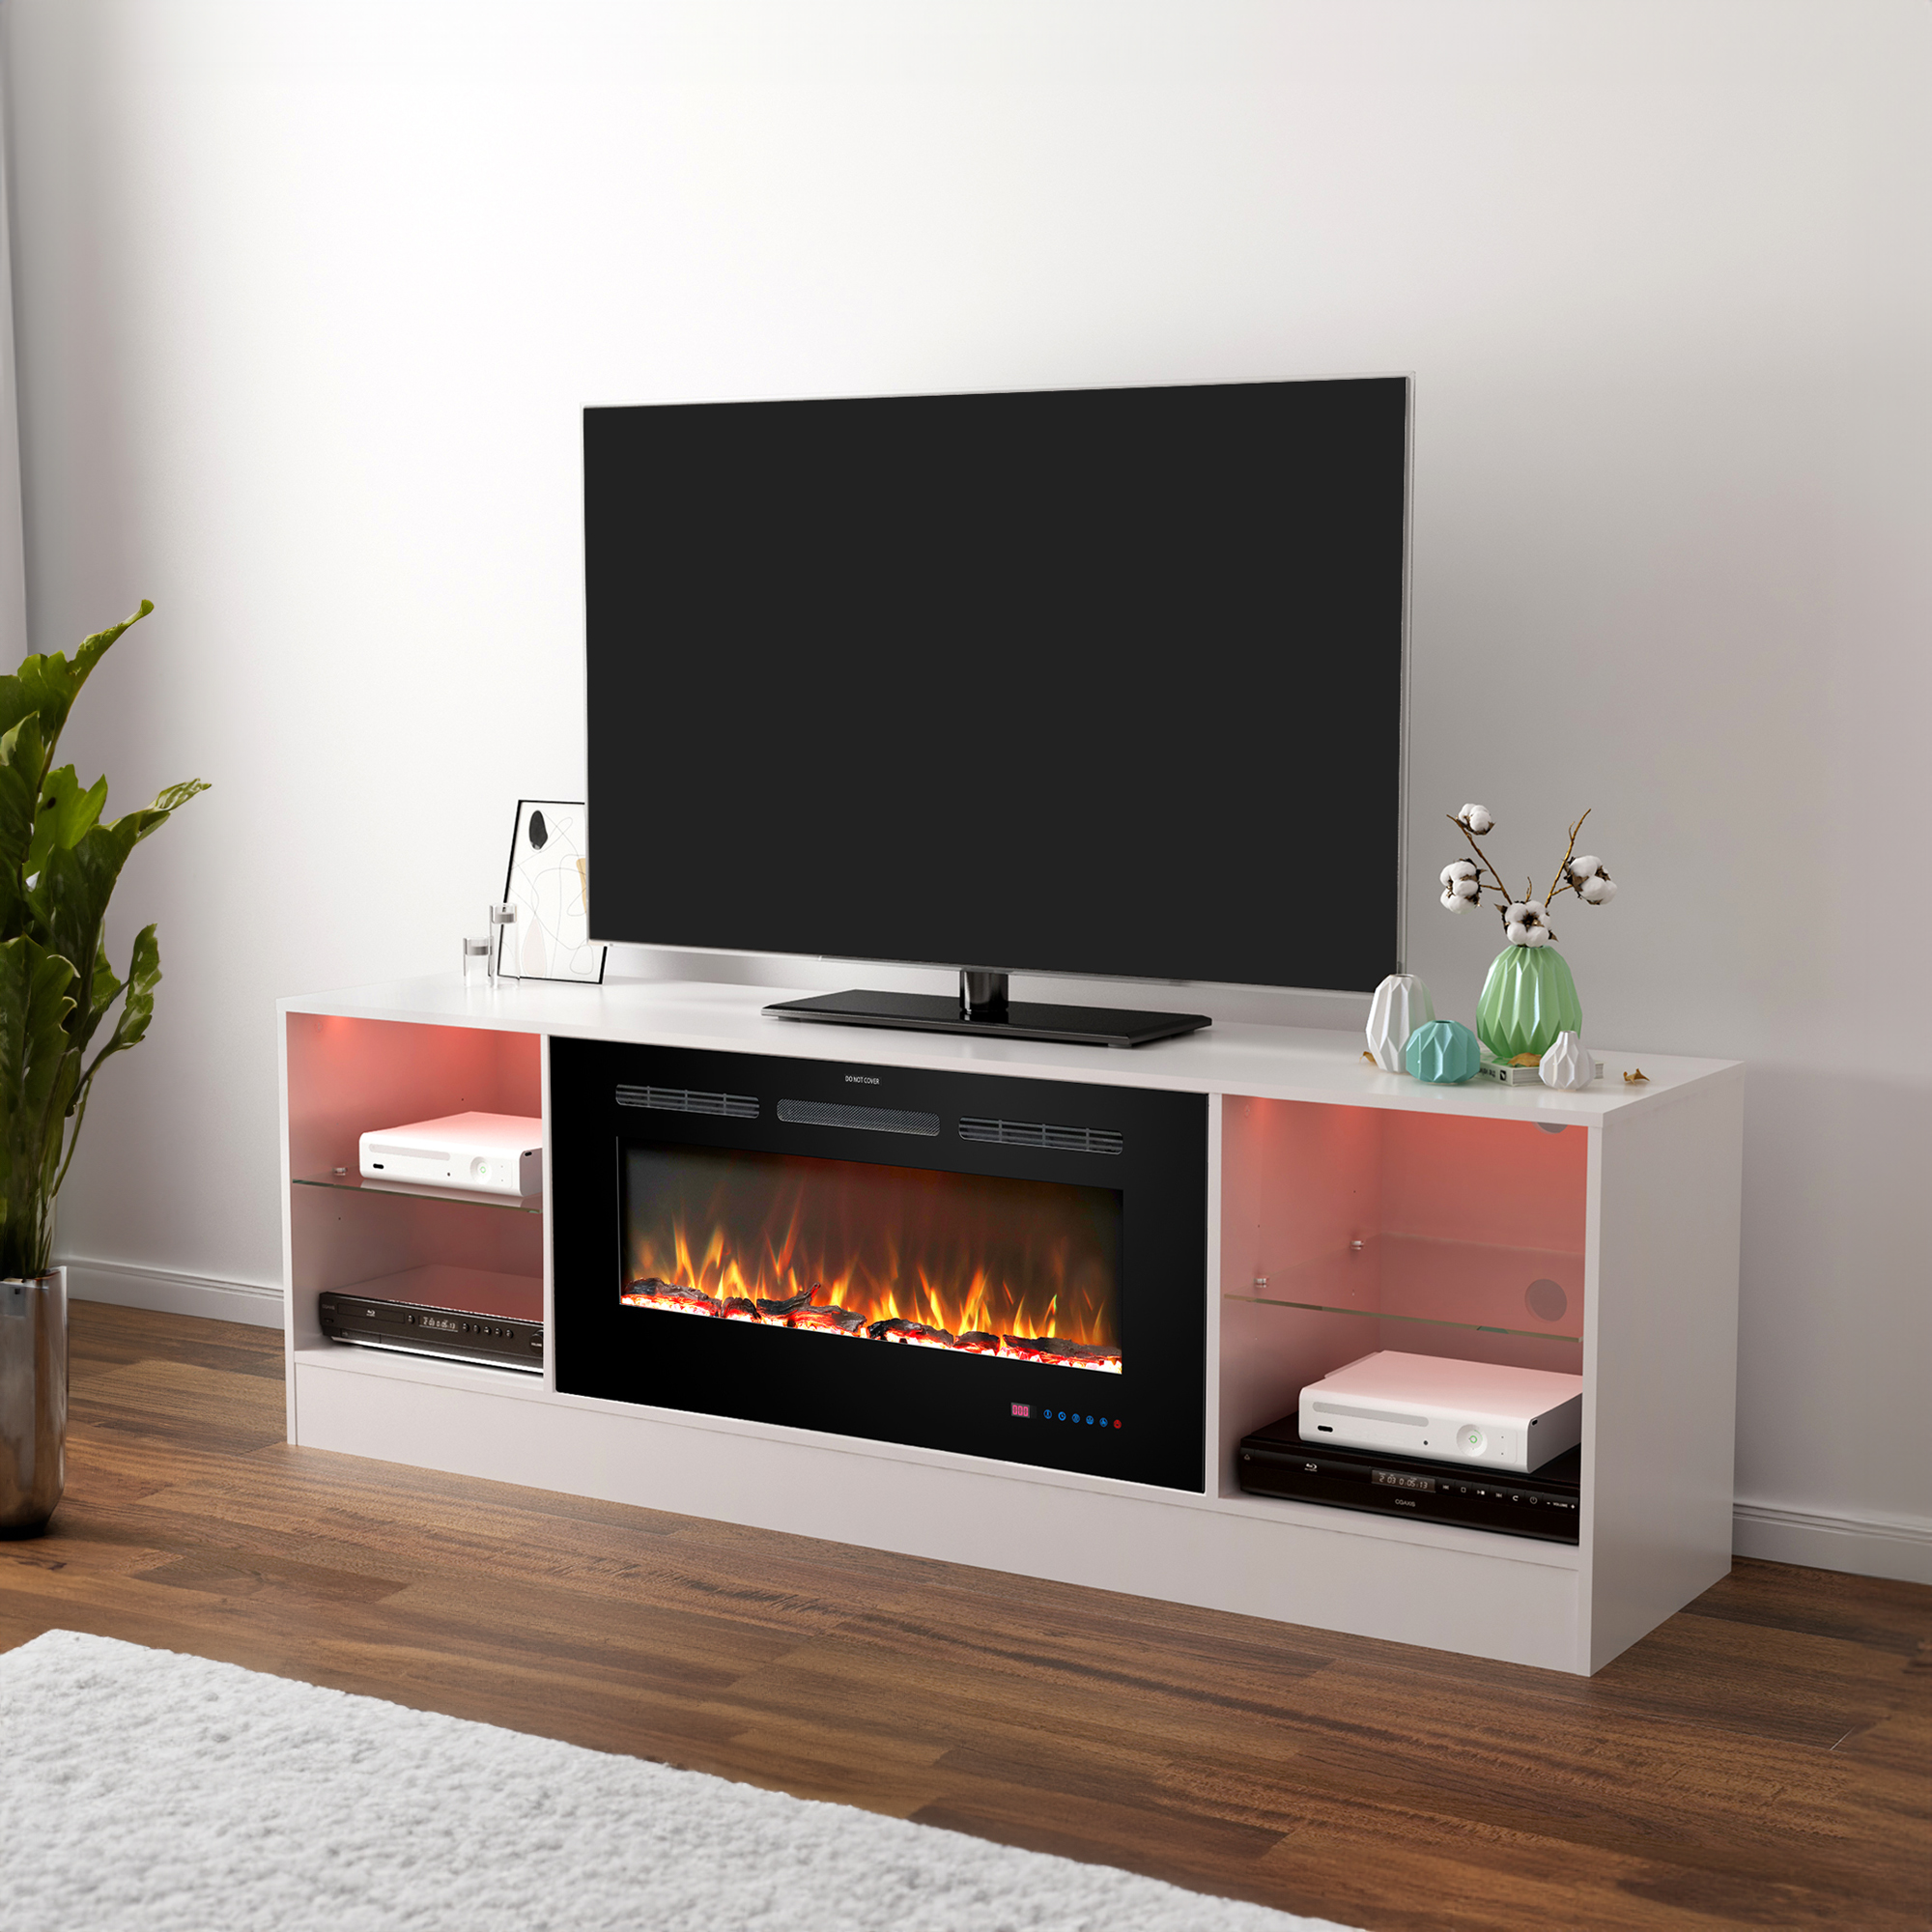 Fireplace 72" TV Stand with 36" Electric Fireplace, Entertainment Center for TVs Up To 80", LED Light, White